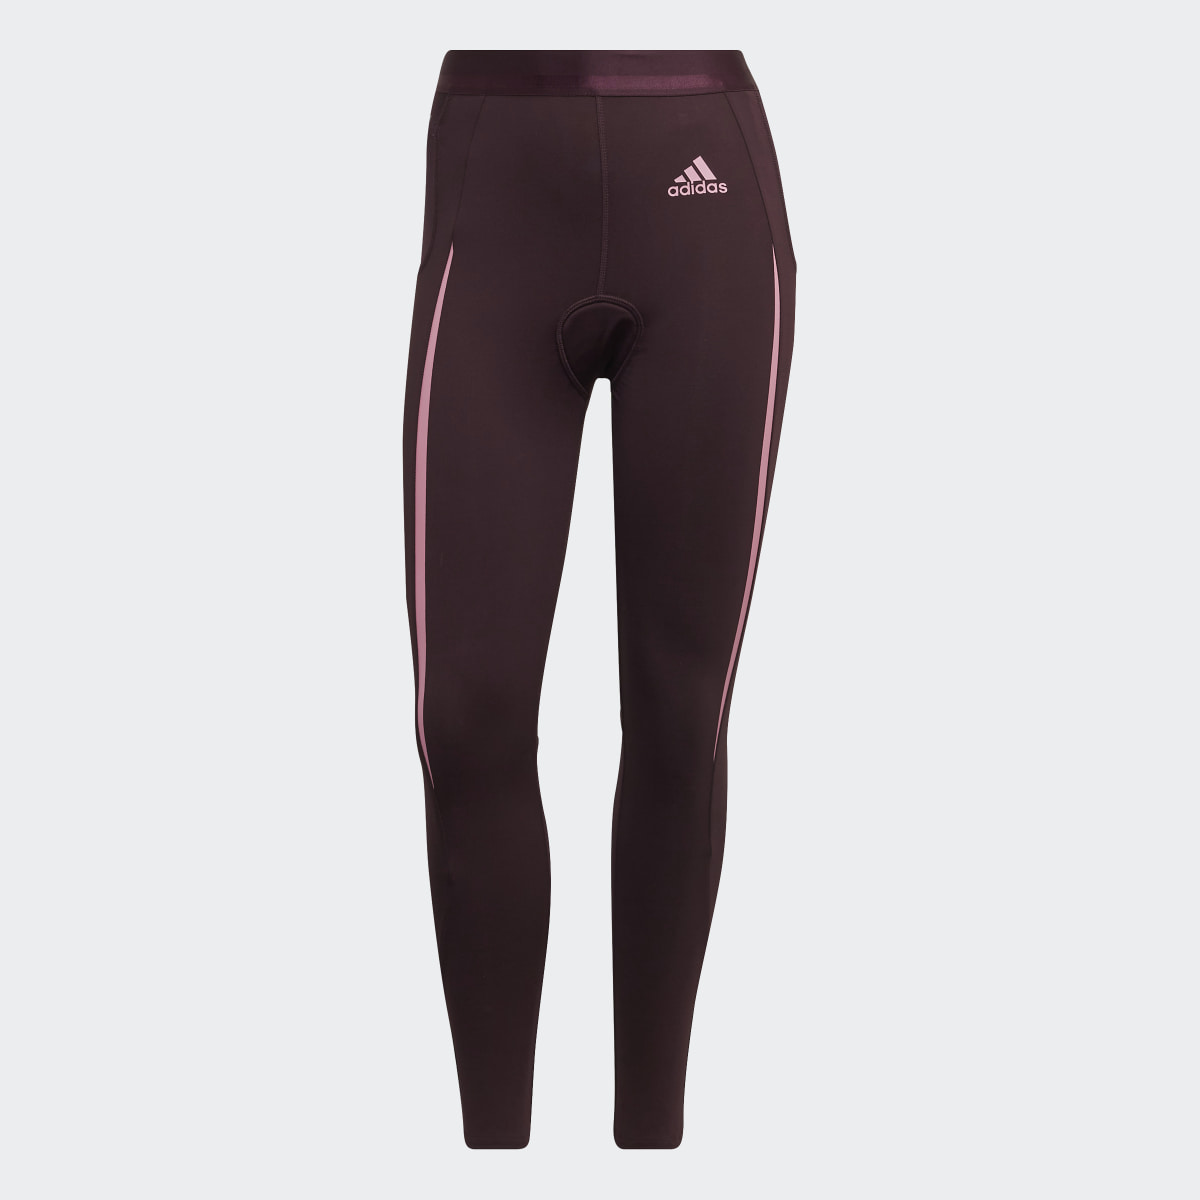 Adidas The Indoor Cycling Leggings. 4